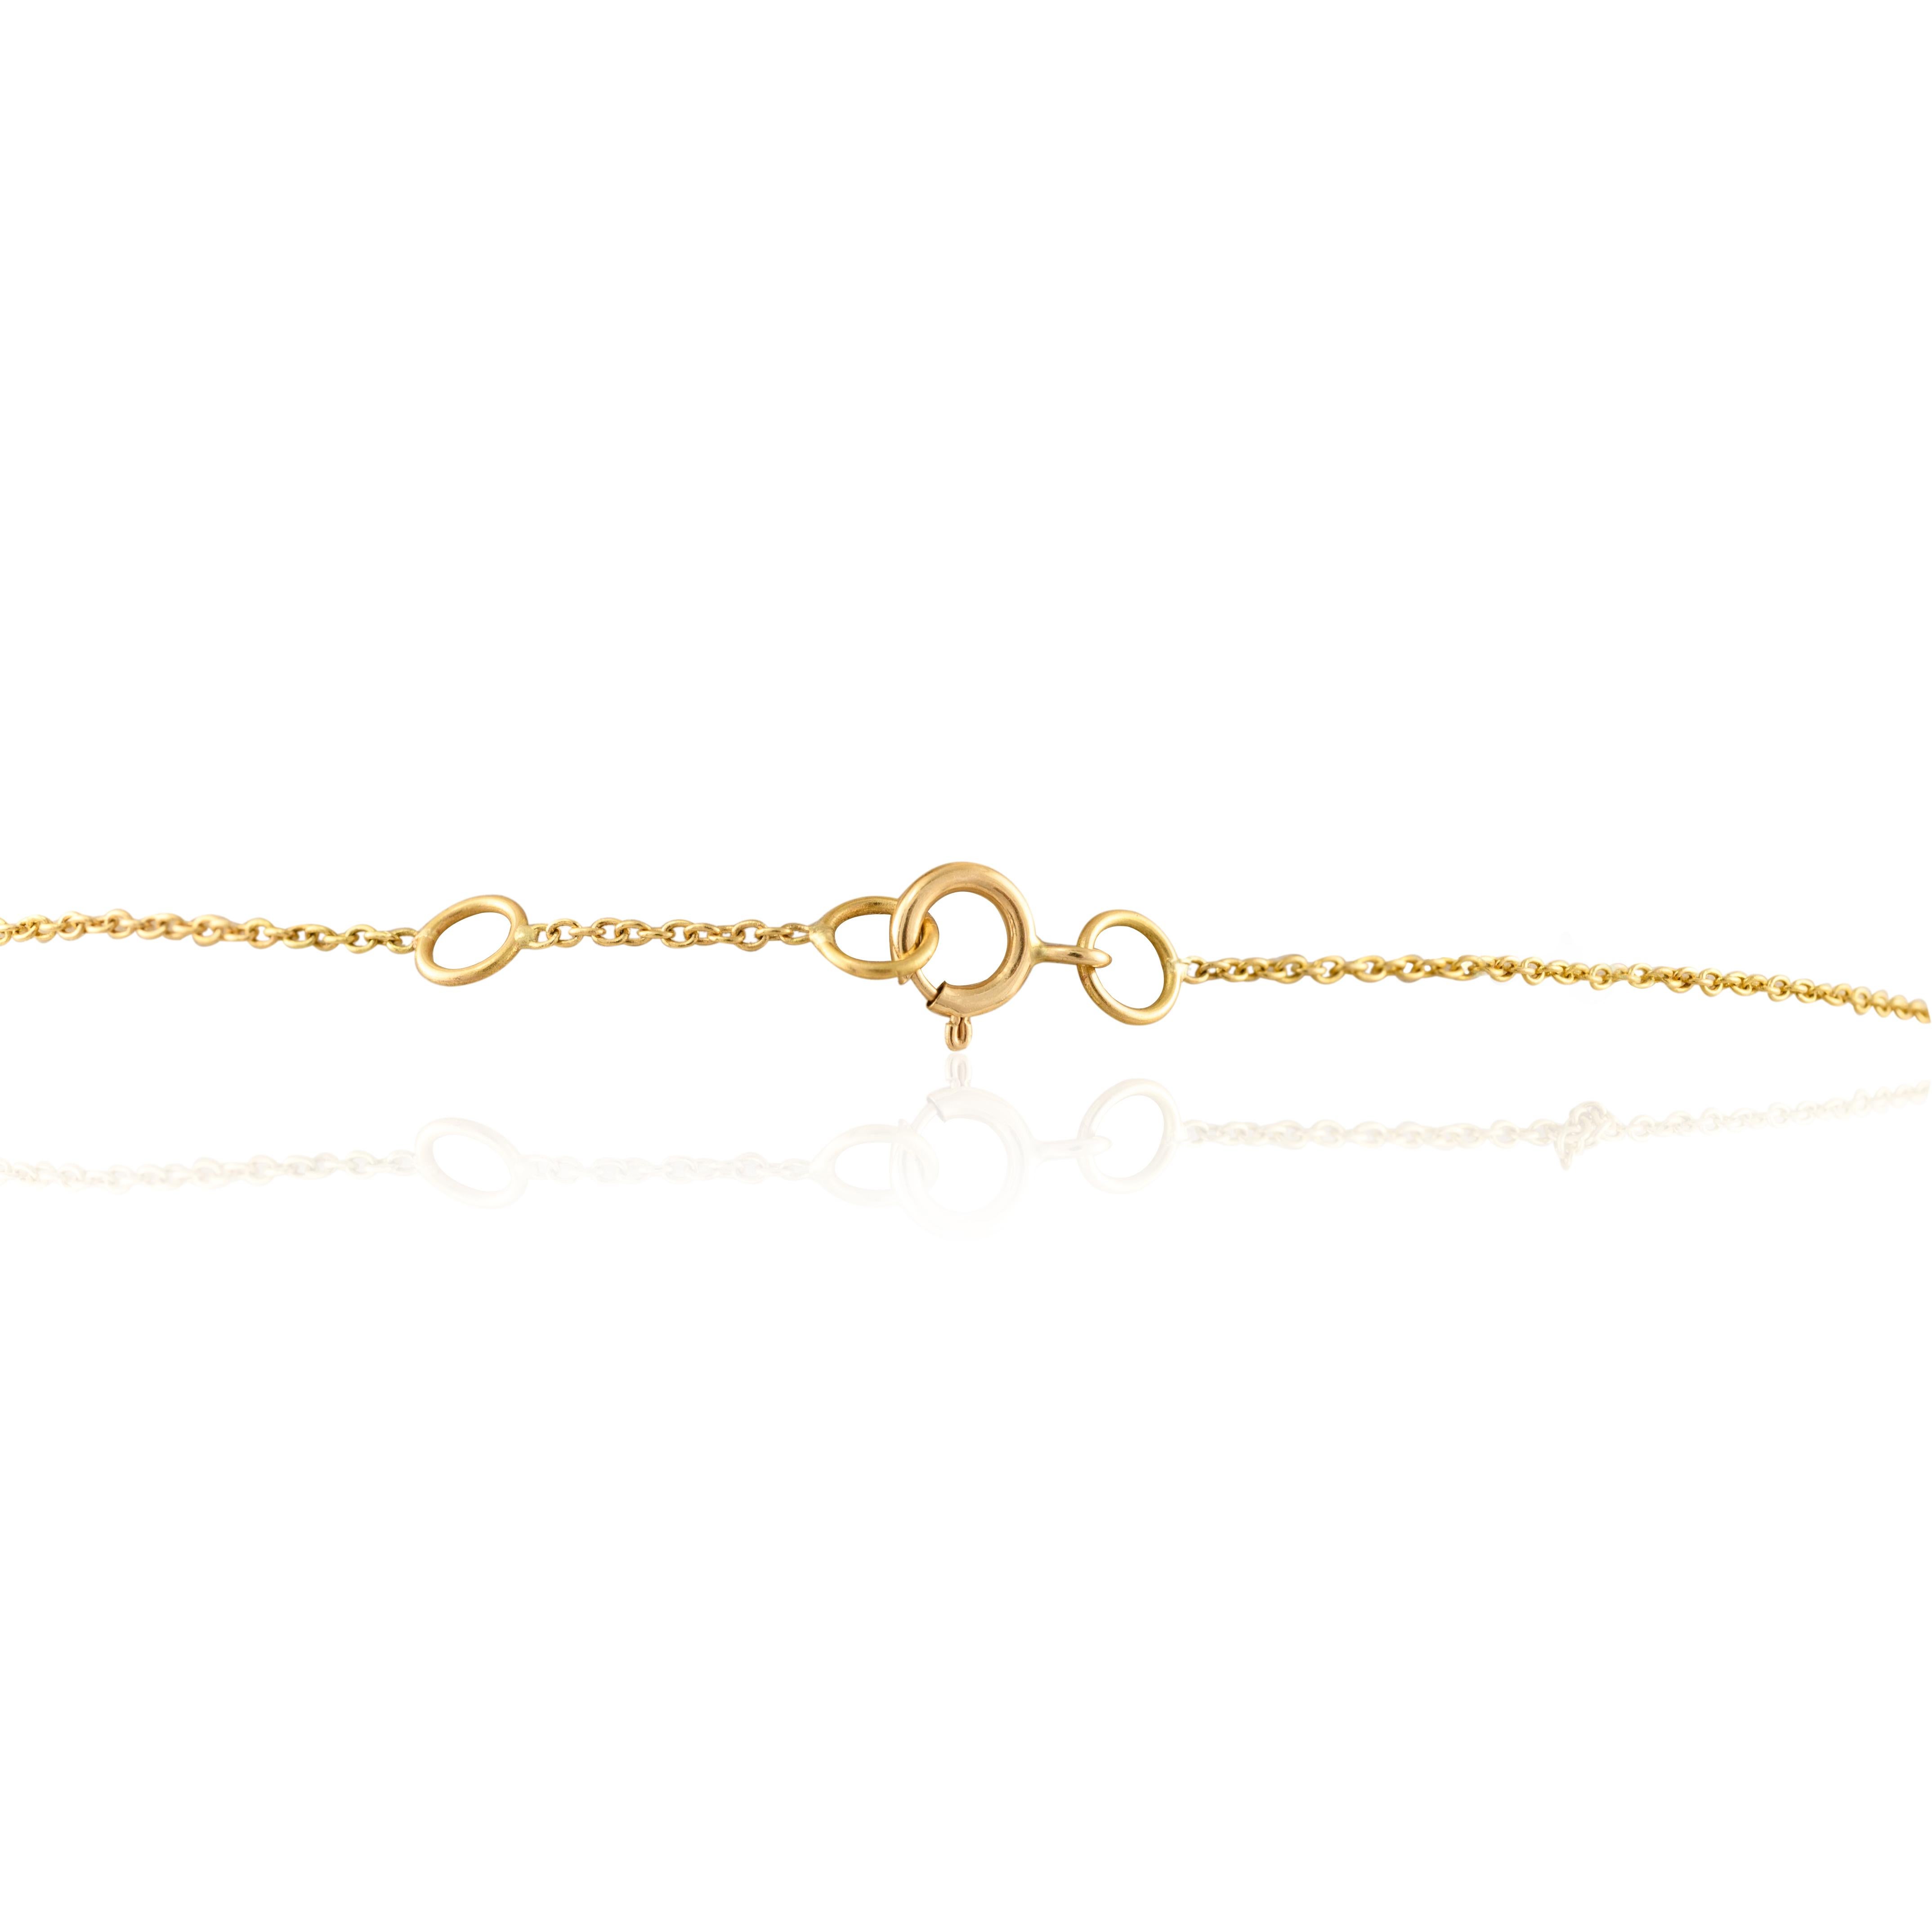 18kt Solid Yellow Gold 1 CTW Diamond Lariat Necklace, Gift For Her Christmas For Sale 1